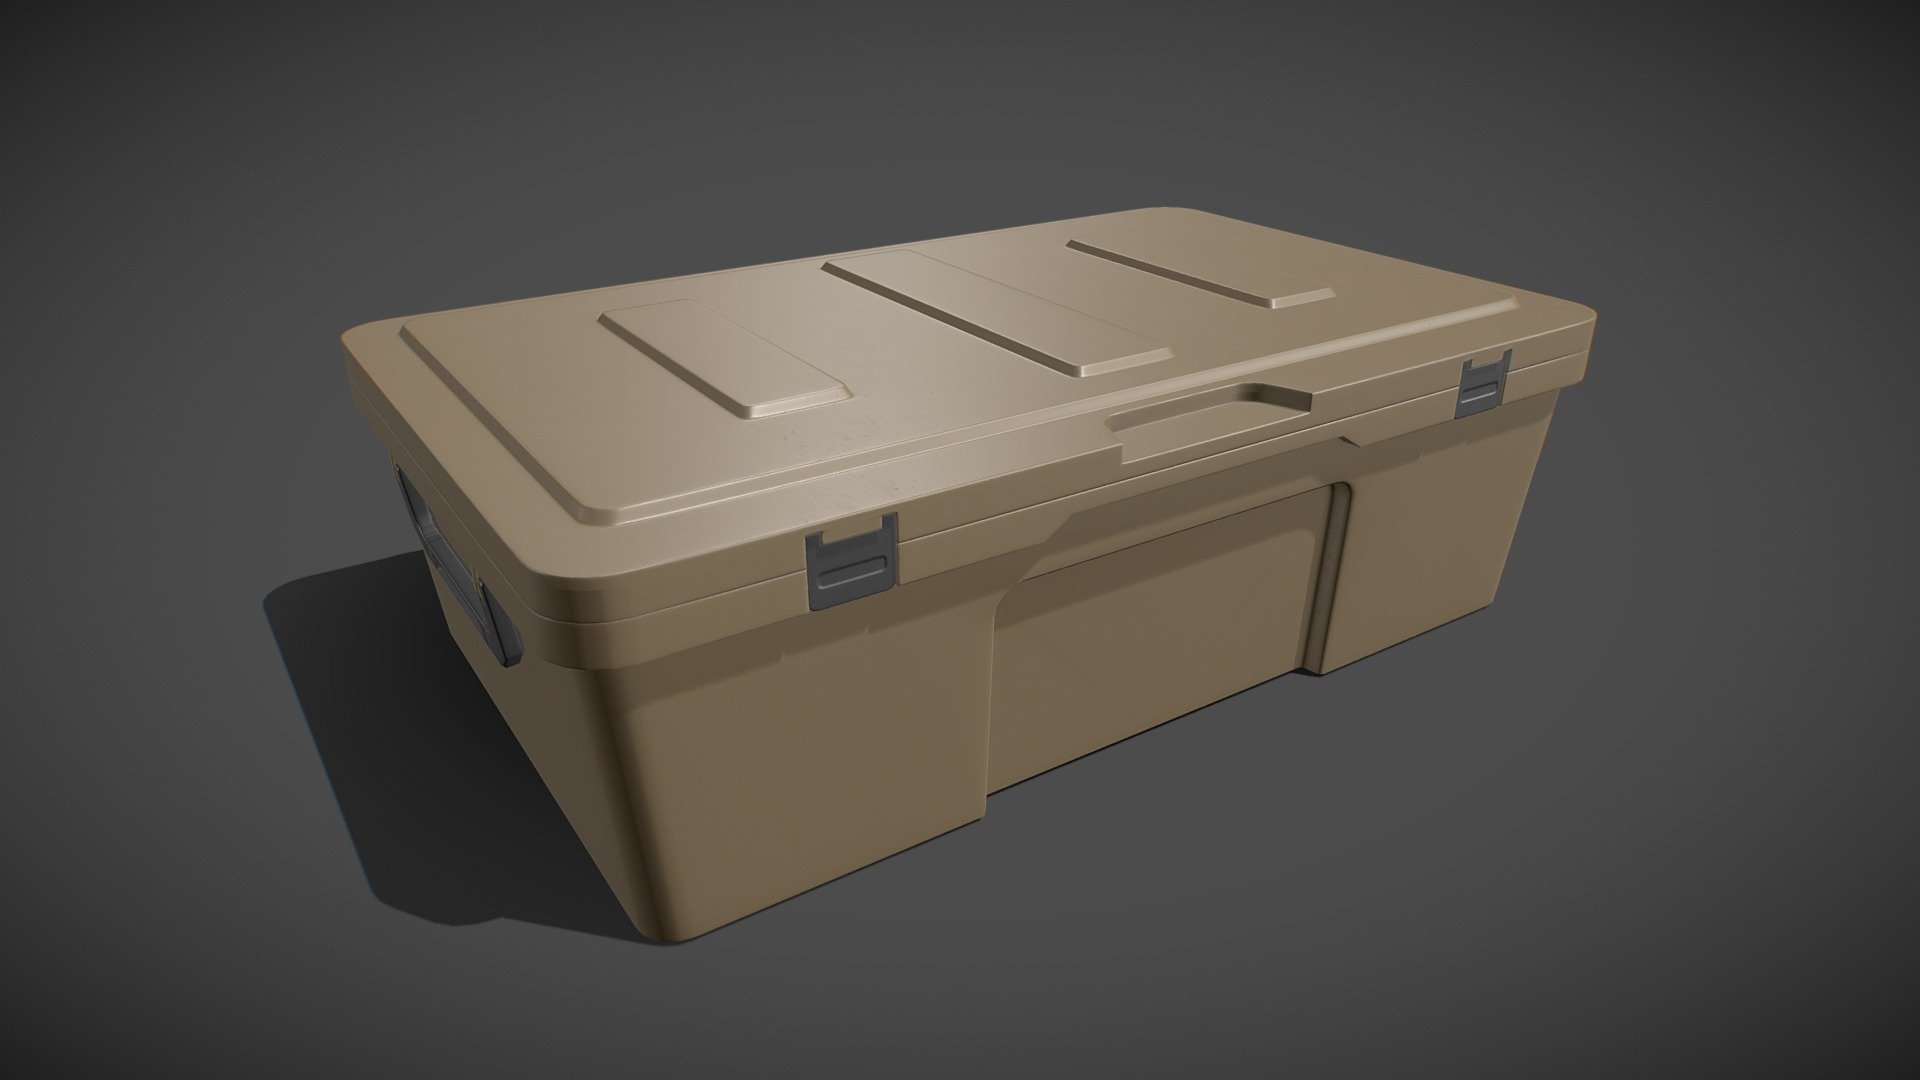 Animated Military Case 12 with PBR Textures and animations (Open/Close). Ideal to loot itens or treasures. Ready to use in any project.

Are you liked this model? Feel free to take a look on my another models! Here

Features:

.Fbx, .Obj, .Uasset and .Blend files.

Low Poly Mesh game-ready.

2 Different colors.

2 Animations (Open/Close).

Rigged.

Real-World Scale (centimeters).

Unreal Project 4.20+

Tris Count: 3,658.

Number of Textures: 6

Number of Textures (UE4/UE5): 4

Skeletal Mesh with custom collision for Unreal Engine 4 (Handmade) (UE4/UE5).

PBR Textures (4096x4096) (PNG).

Type of Textures: Base Color, Roughness, Metallic, Normal Map and Ambient Occlusion (PNG)

Combined RMA texture (Roughness, Metallic and Ambient Occlusion) for Unreal Engine 4 (PNG) 3d model